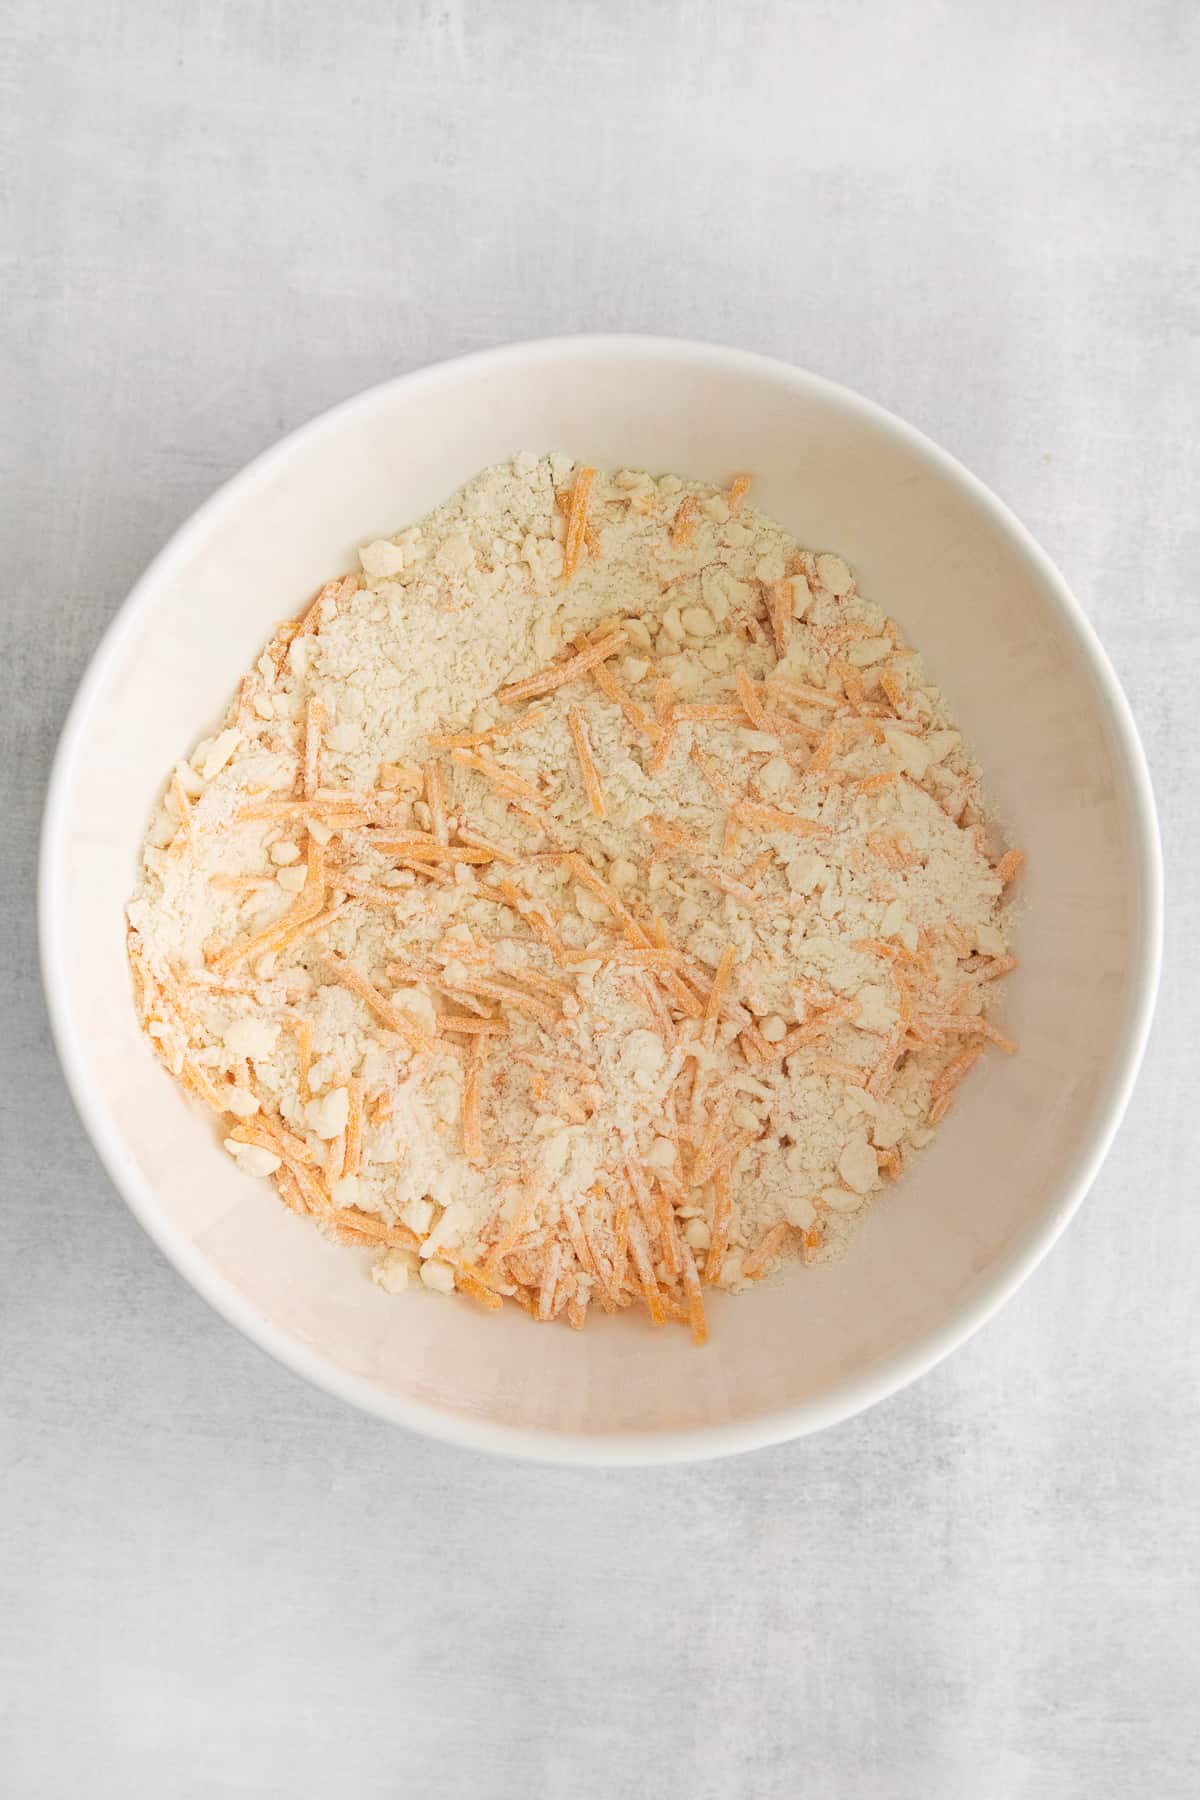 Dry ingredients for cheddar biscuits in a bowl.